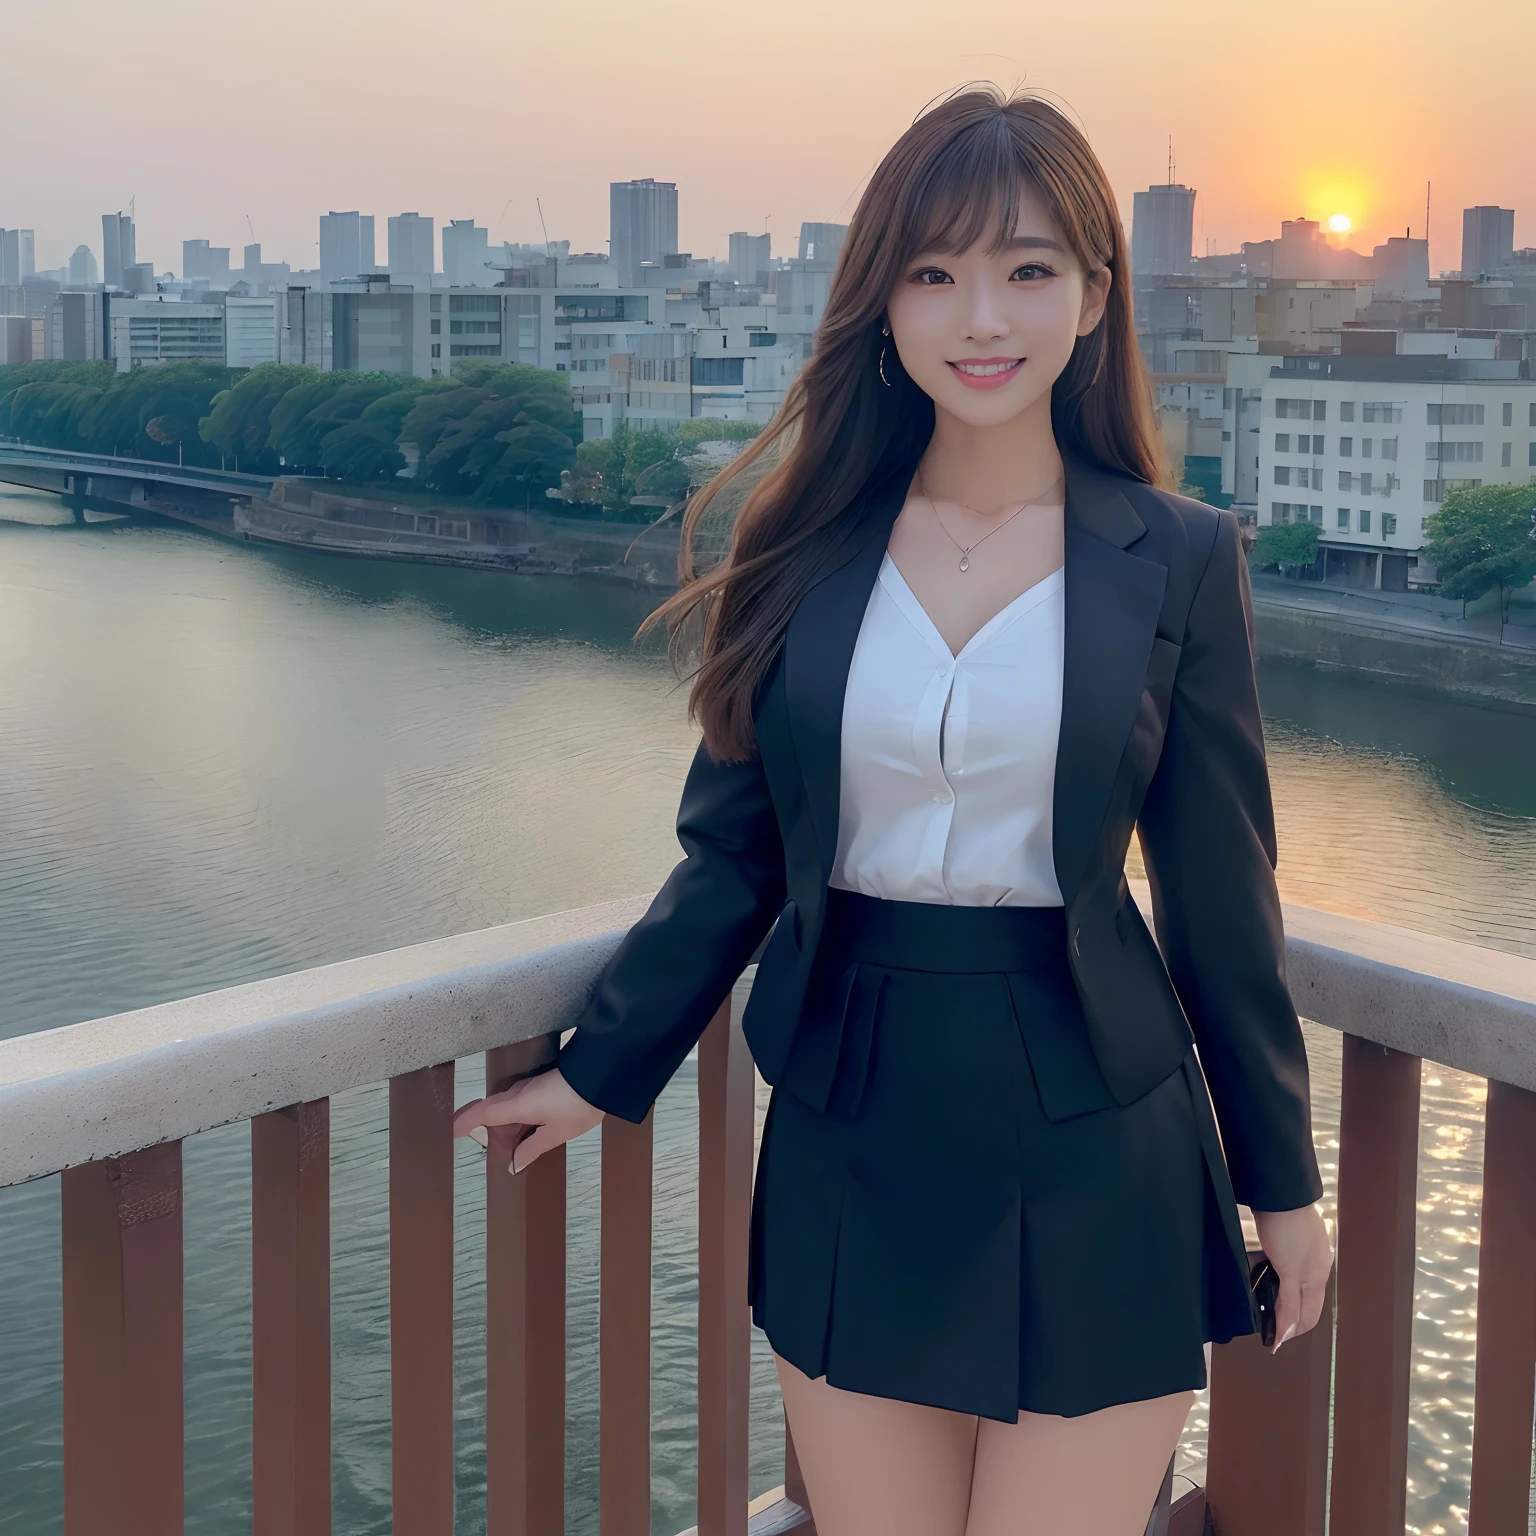 (((Best Quality, masutepiece, 超A high resolution、The most complex and detailed depictions)))、(One woman、OL、office attire、Navy Suit Jacket、white  shirt、tight skirts、a miniskirt、Perfect gas chamber)、((Walk on the bridges of the city、Walk on the iron bridge、Perfect iron bridge、Bridge over the taiga、Big rivers、A large group of buildings in the background、TOKYOcty、tokyo streets、Lots of buildings in the background、Evening glow、Beautiful sunset、Fantastic sunset、Spectacular lighting of the film、Shot from the waist up))、Emphasize body lines、A slight smil、grin、Perfect makeup、long、straight haired、a necklace